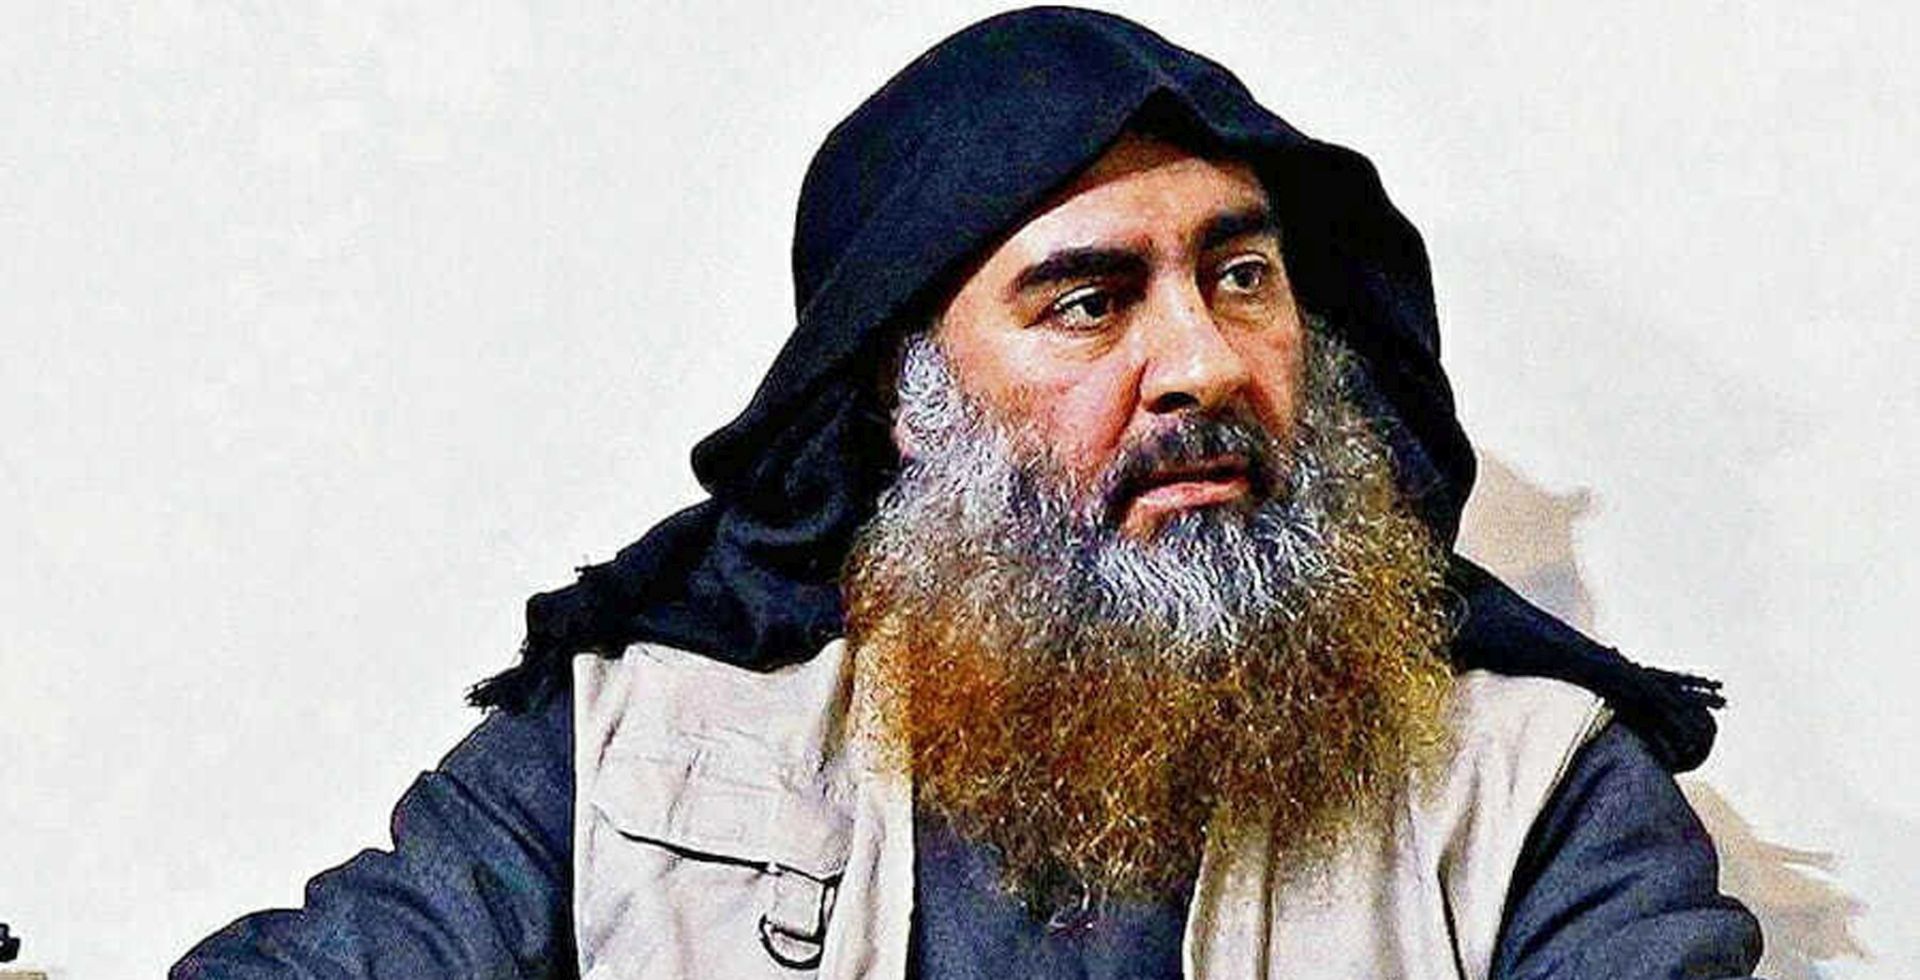 epa07971238 An undated handout photo made available by the US Department of Defense (DOD) shows Abu Bakr Al-Baghdadi, who was the Iraqi-born leader of the so-called Islamic State in Iraq and Syria (ISIS) terrorist organization (issued 04 November 2019). According to a statement by US President Donald J. Trump, Abu Bakr Al-Baghdadi killed himself and two children by detonating a suicide vest on 27 October 2019 during a raid conducted by US forces in Syria's northwestern Idlib Province. ISIS media on 31 October 2019 confirmed the death of Baghdadi, and named Abu Ibrahim al-Hashimi al-Qurayshi as his replacement.  EPA/US DEPARTMENT OF DEFENSE HANDOUT  HANDOUT EDITORIAL USE ONLY/NO SALES